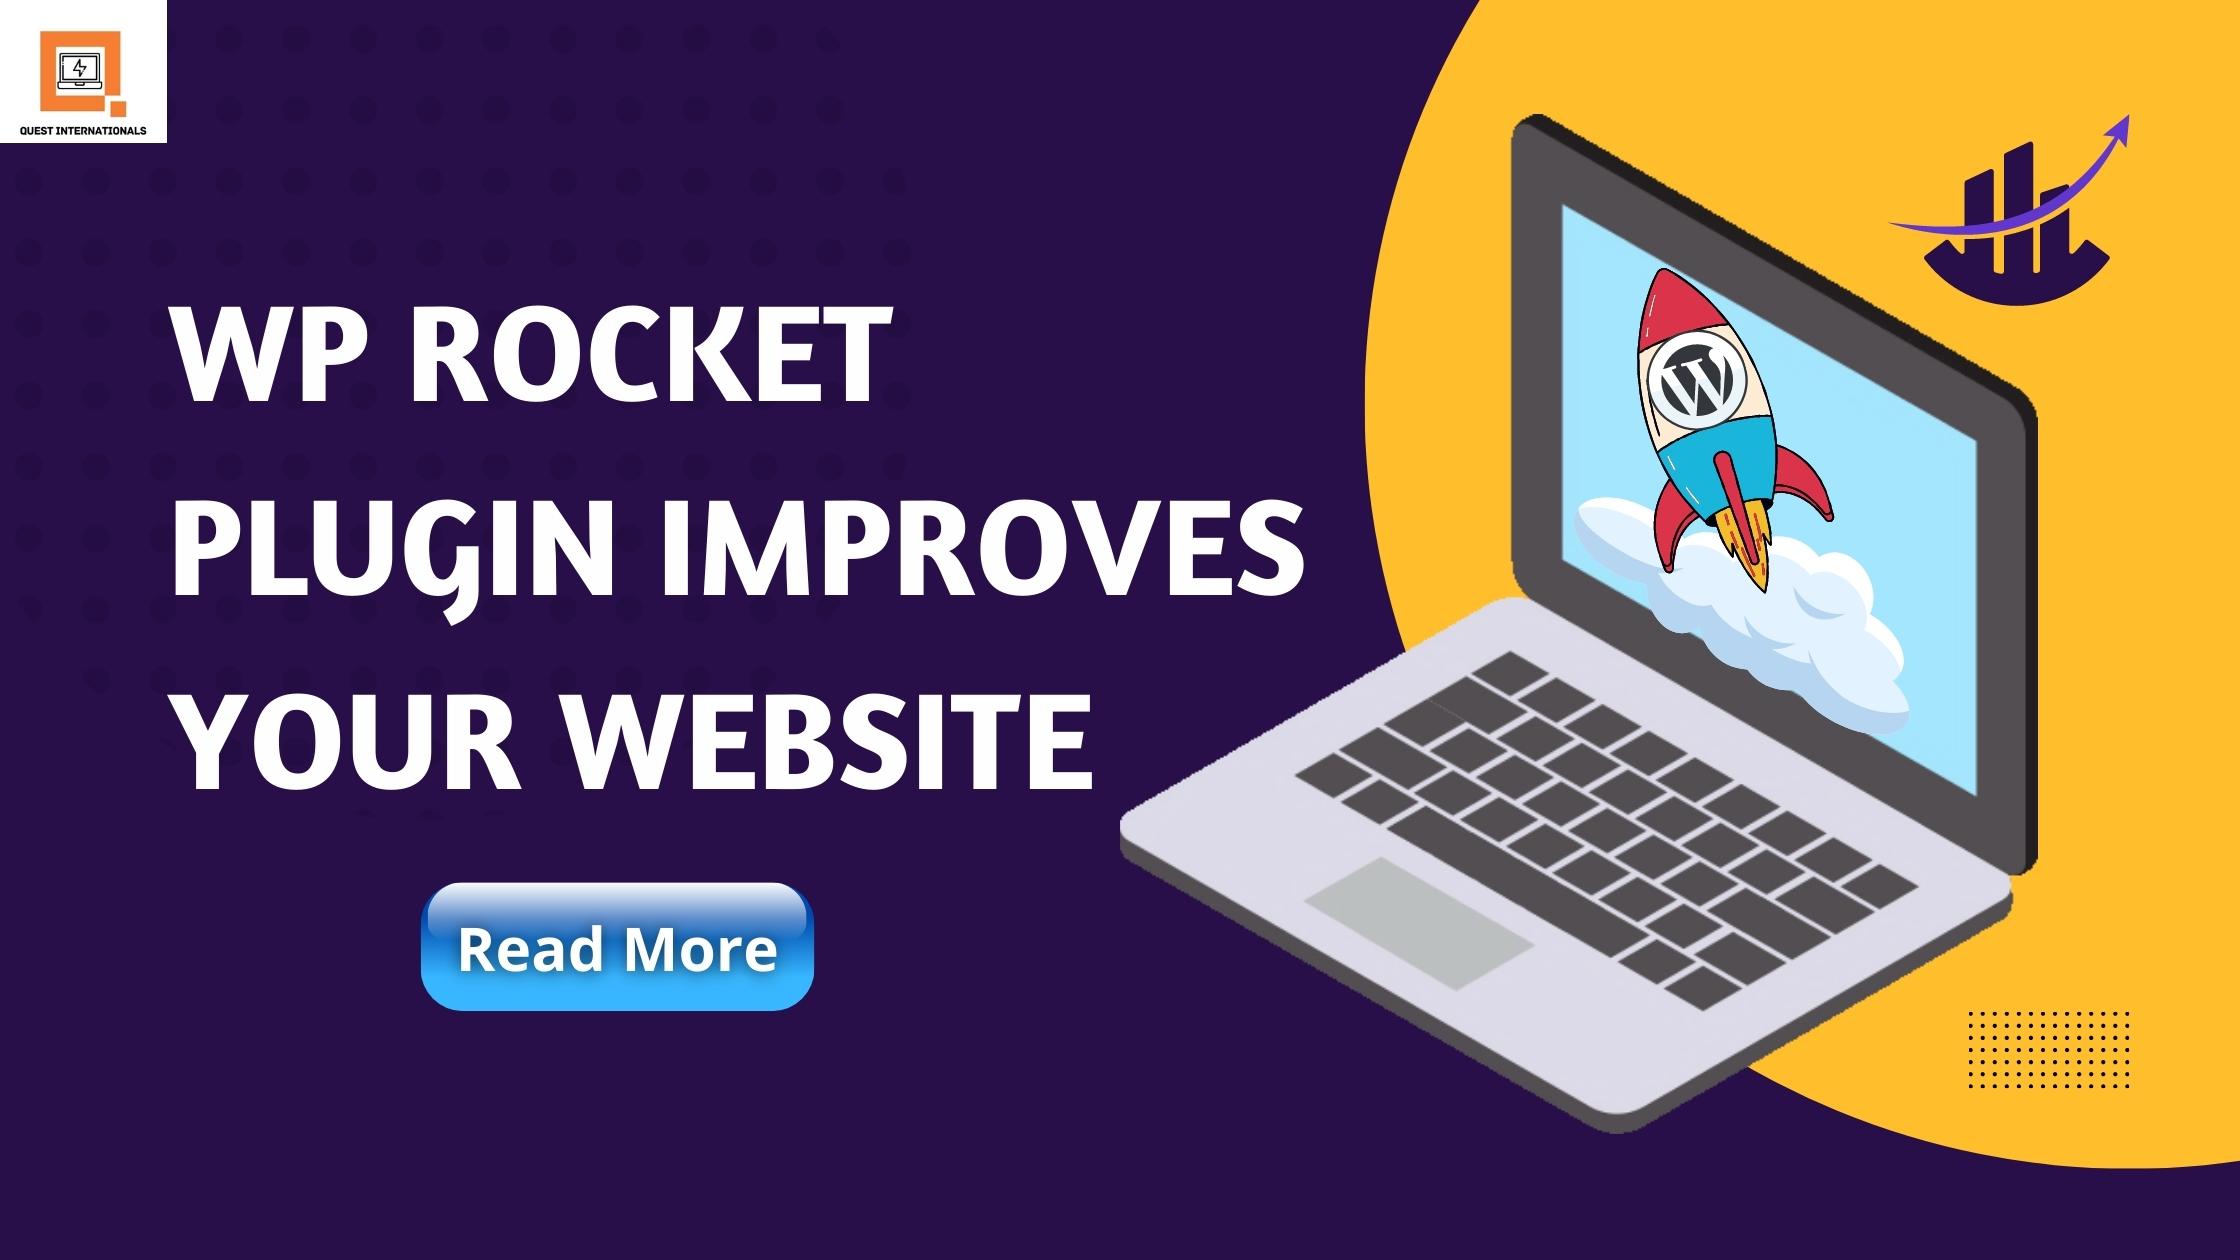 You are currently viewing WP ROCKET PLUGIN IMPROVES YOUR WEBSITE